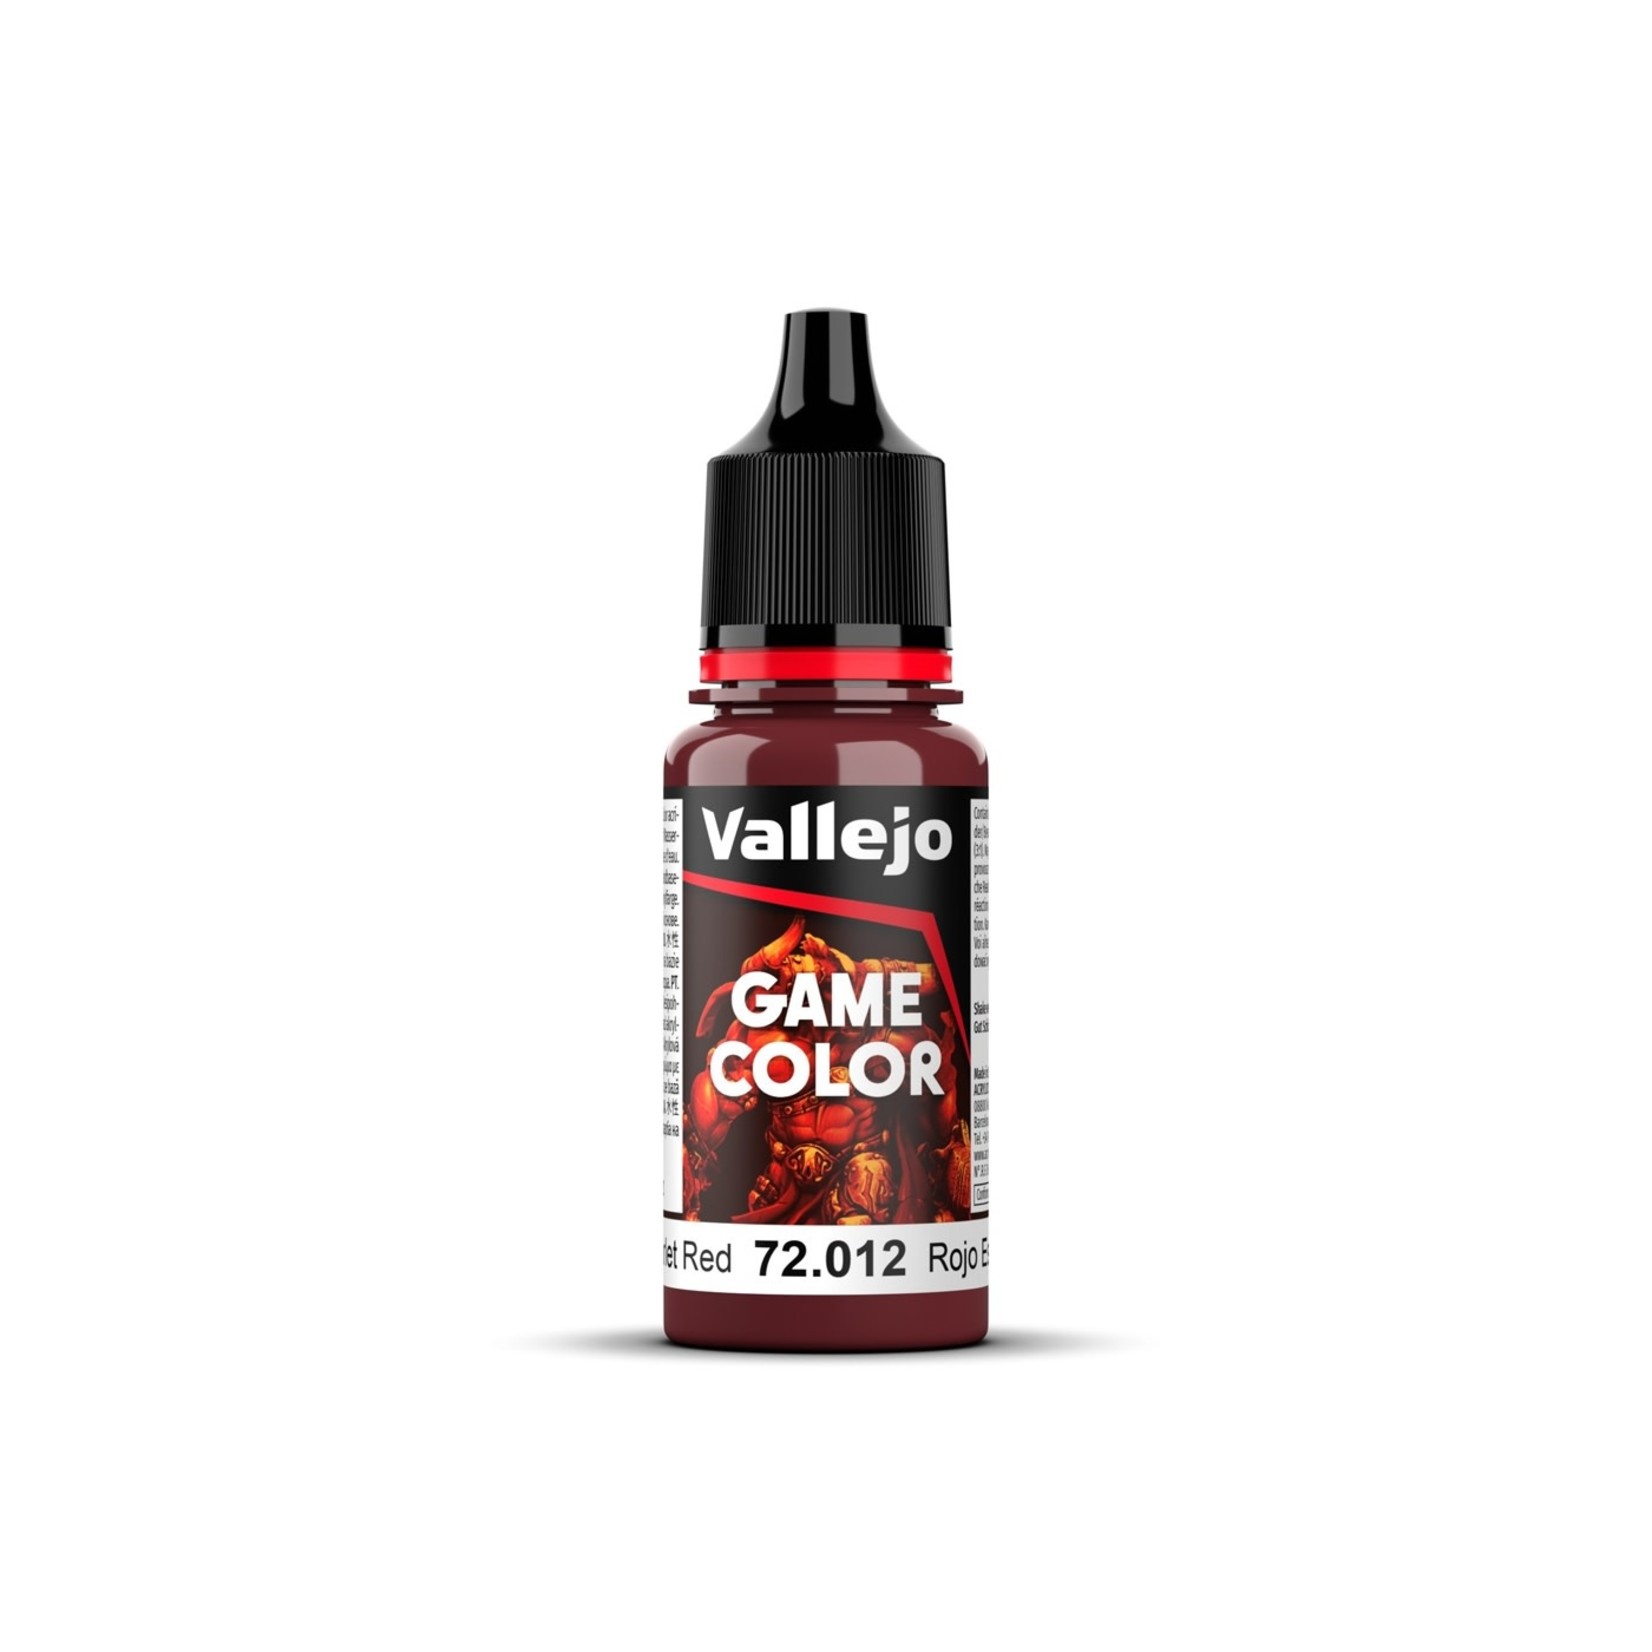 Vallejo Paint: Game Color (Scarlet Red)